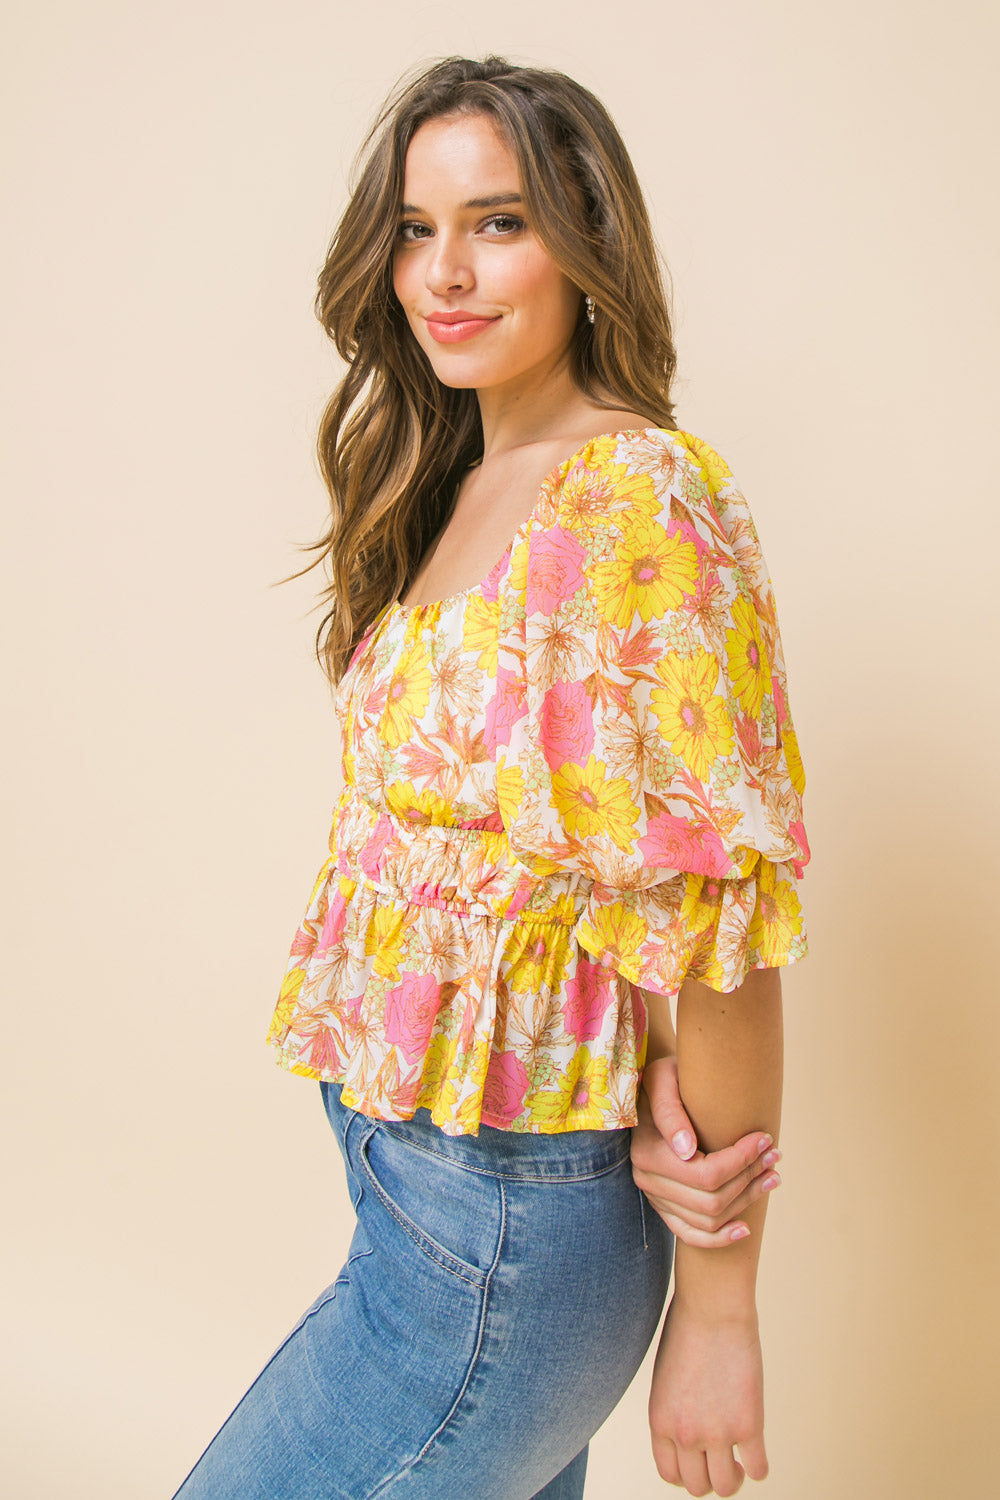 OUR LOVE CONNECTION WOVEN TOP